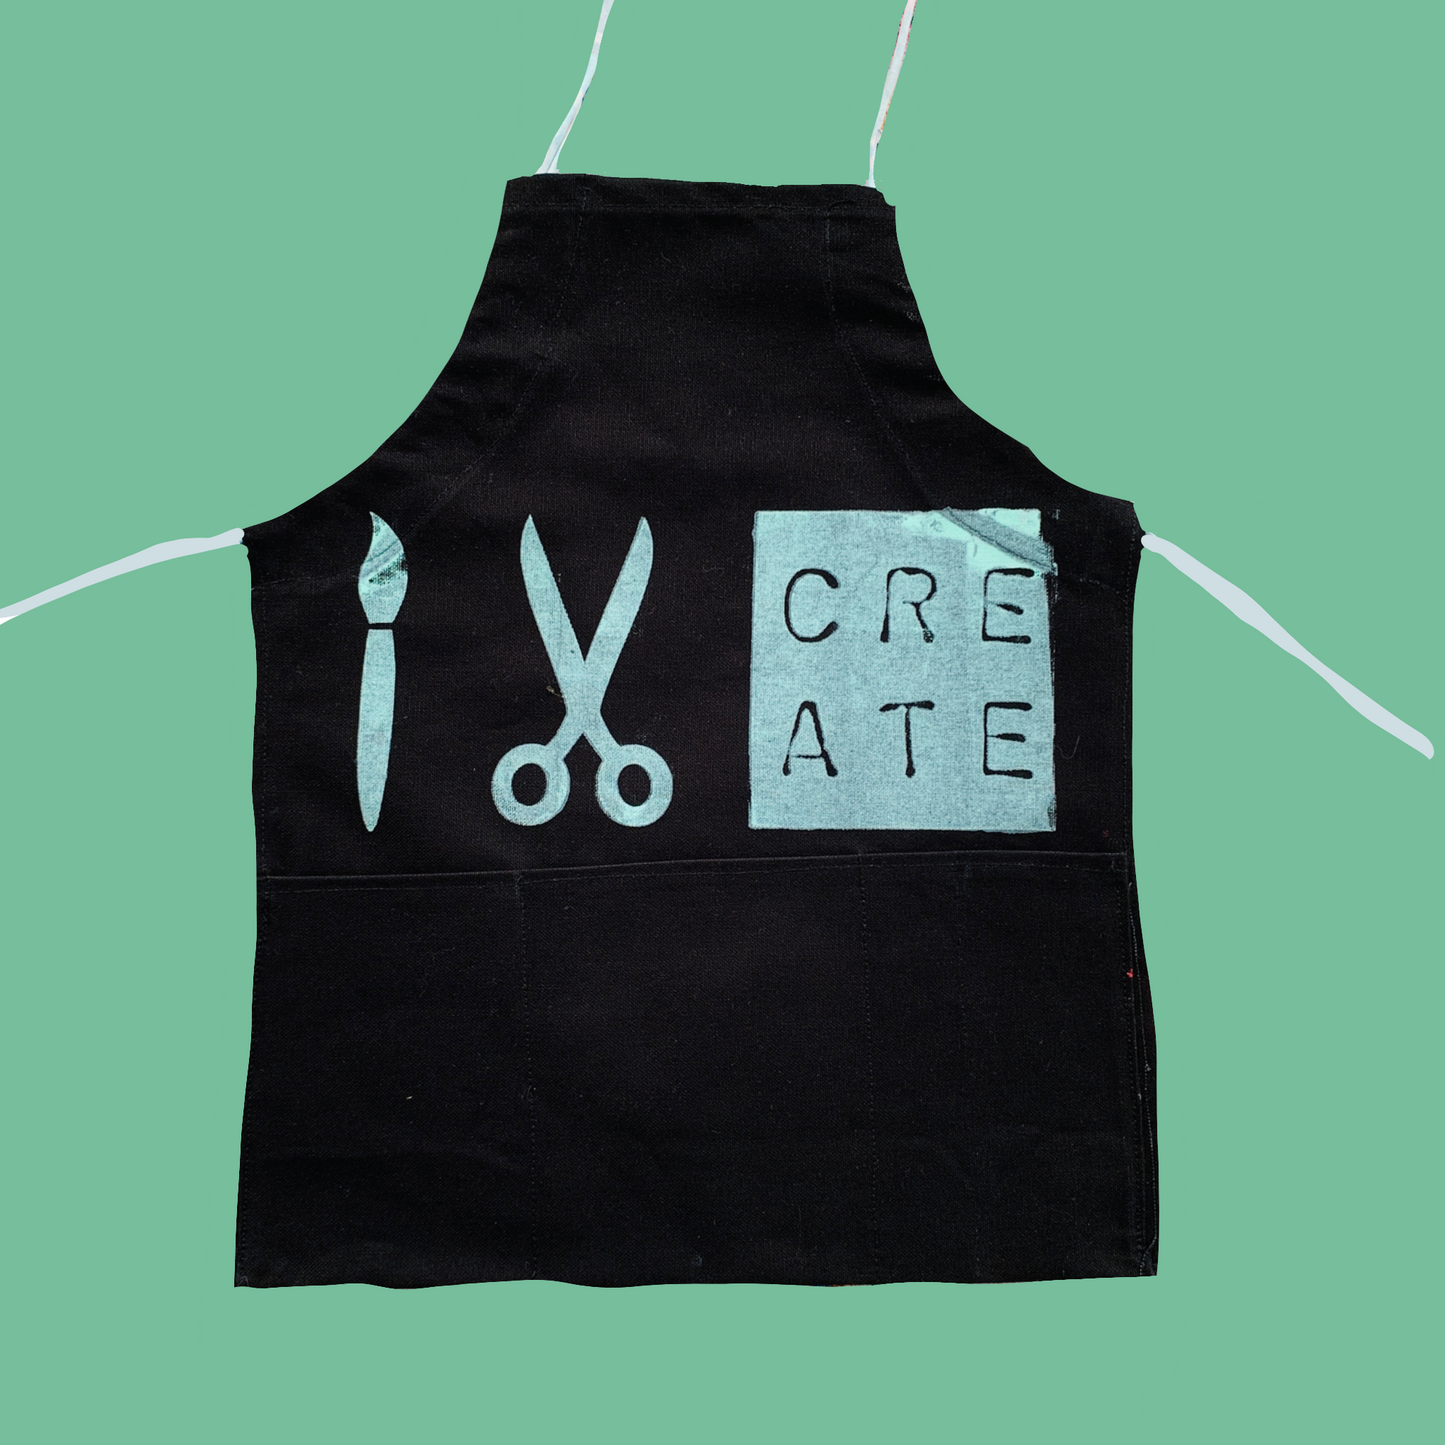 Artist Coverall Aprons